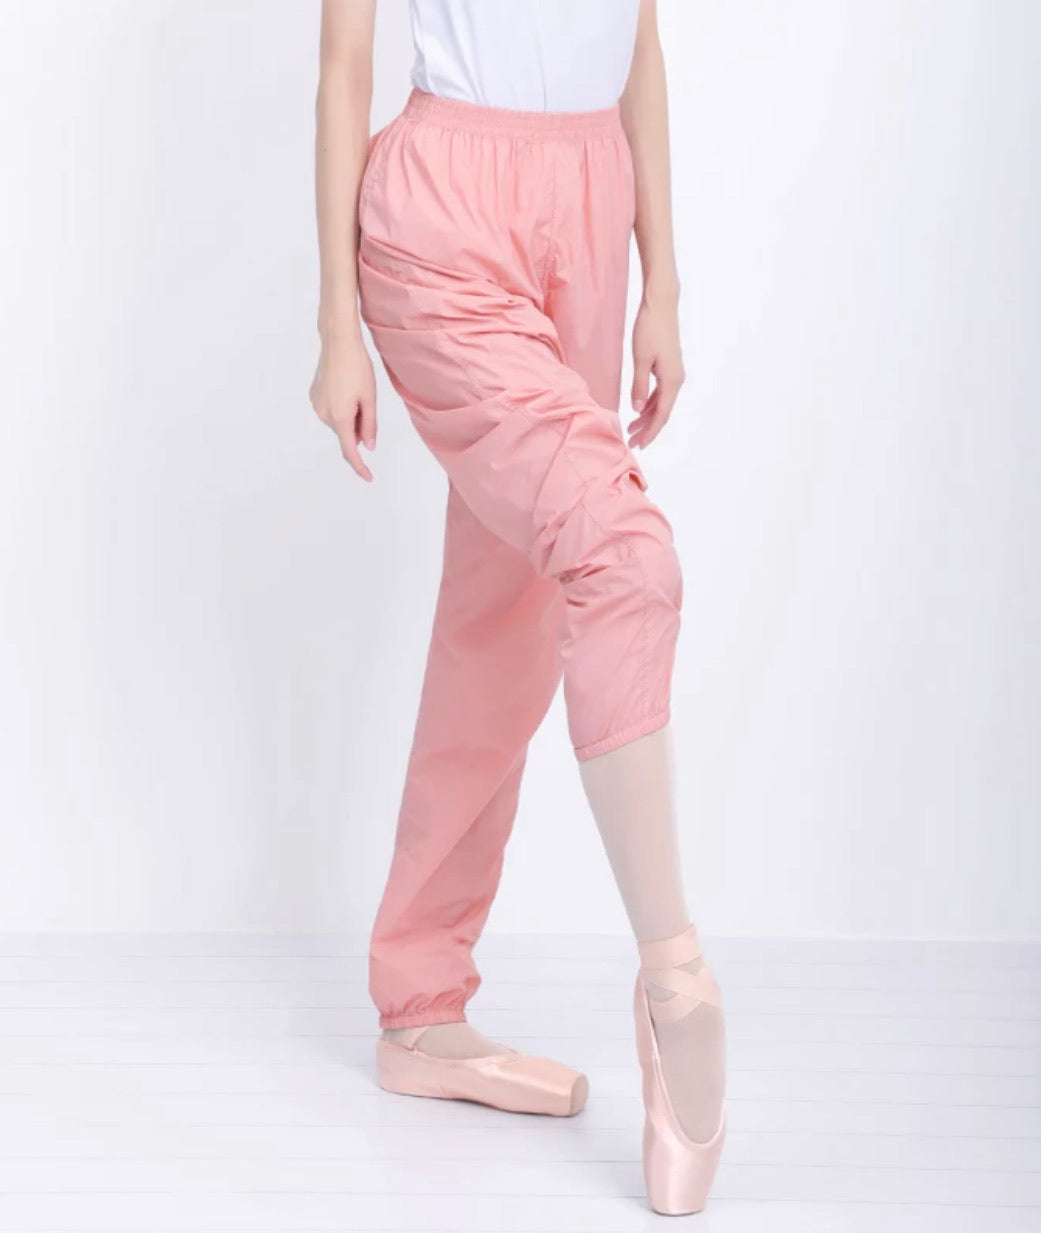 The trash bag pants collection by WorldWide Ballet, warm up wear